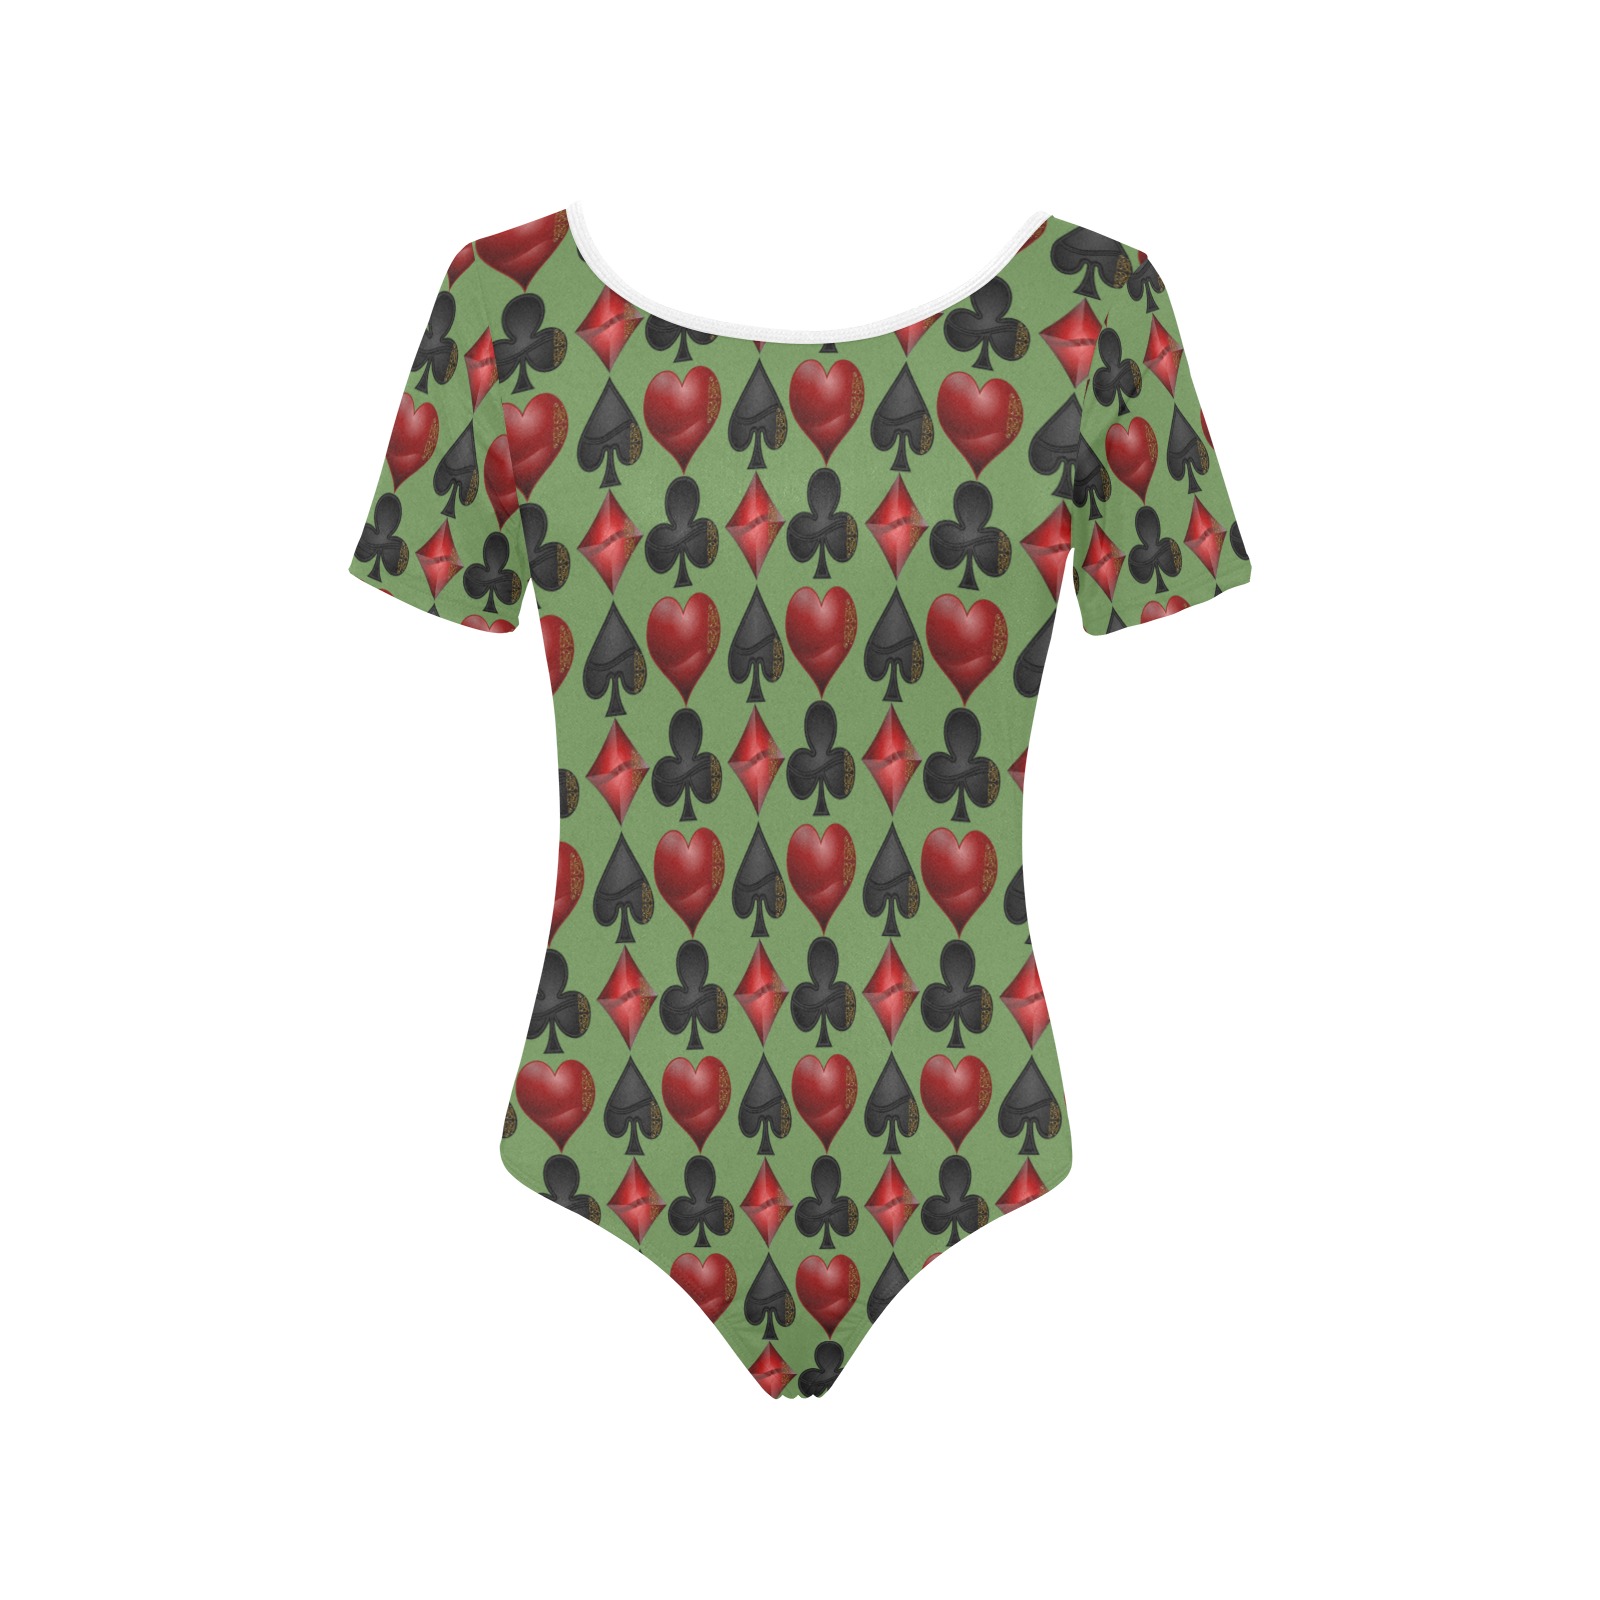 Black Red Playing Card Shapes Green Women's Short Sleeve Bodysuit